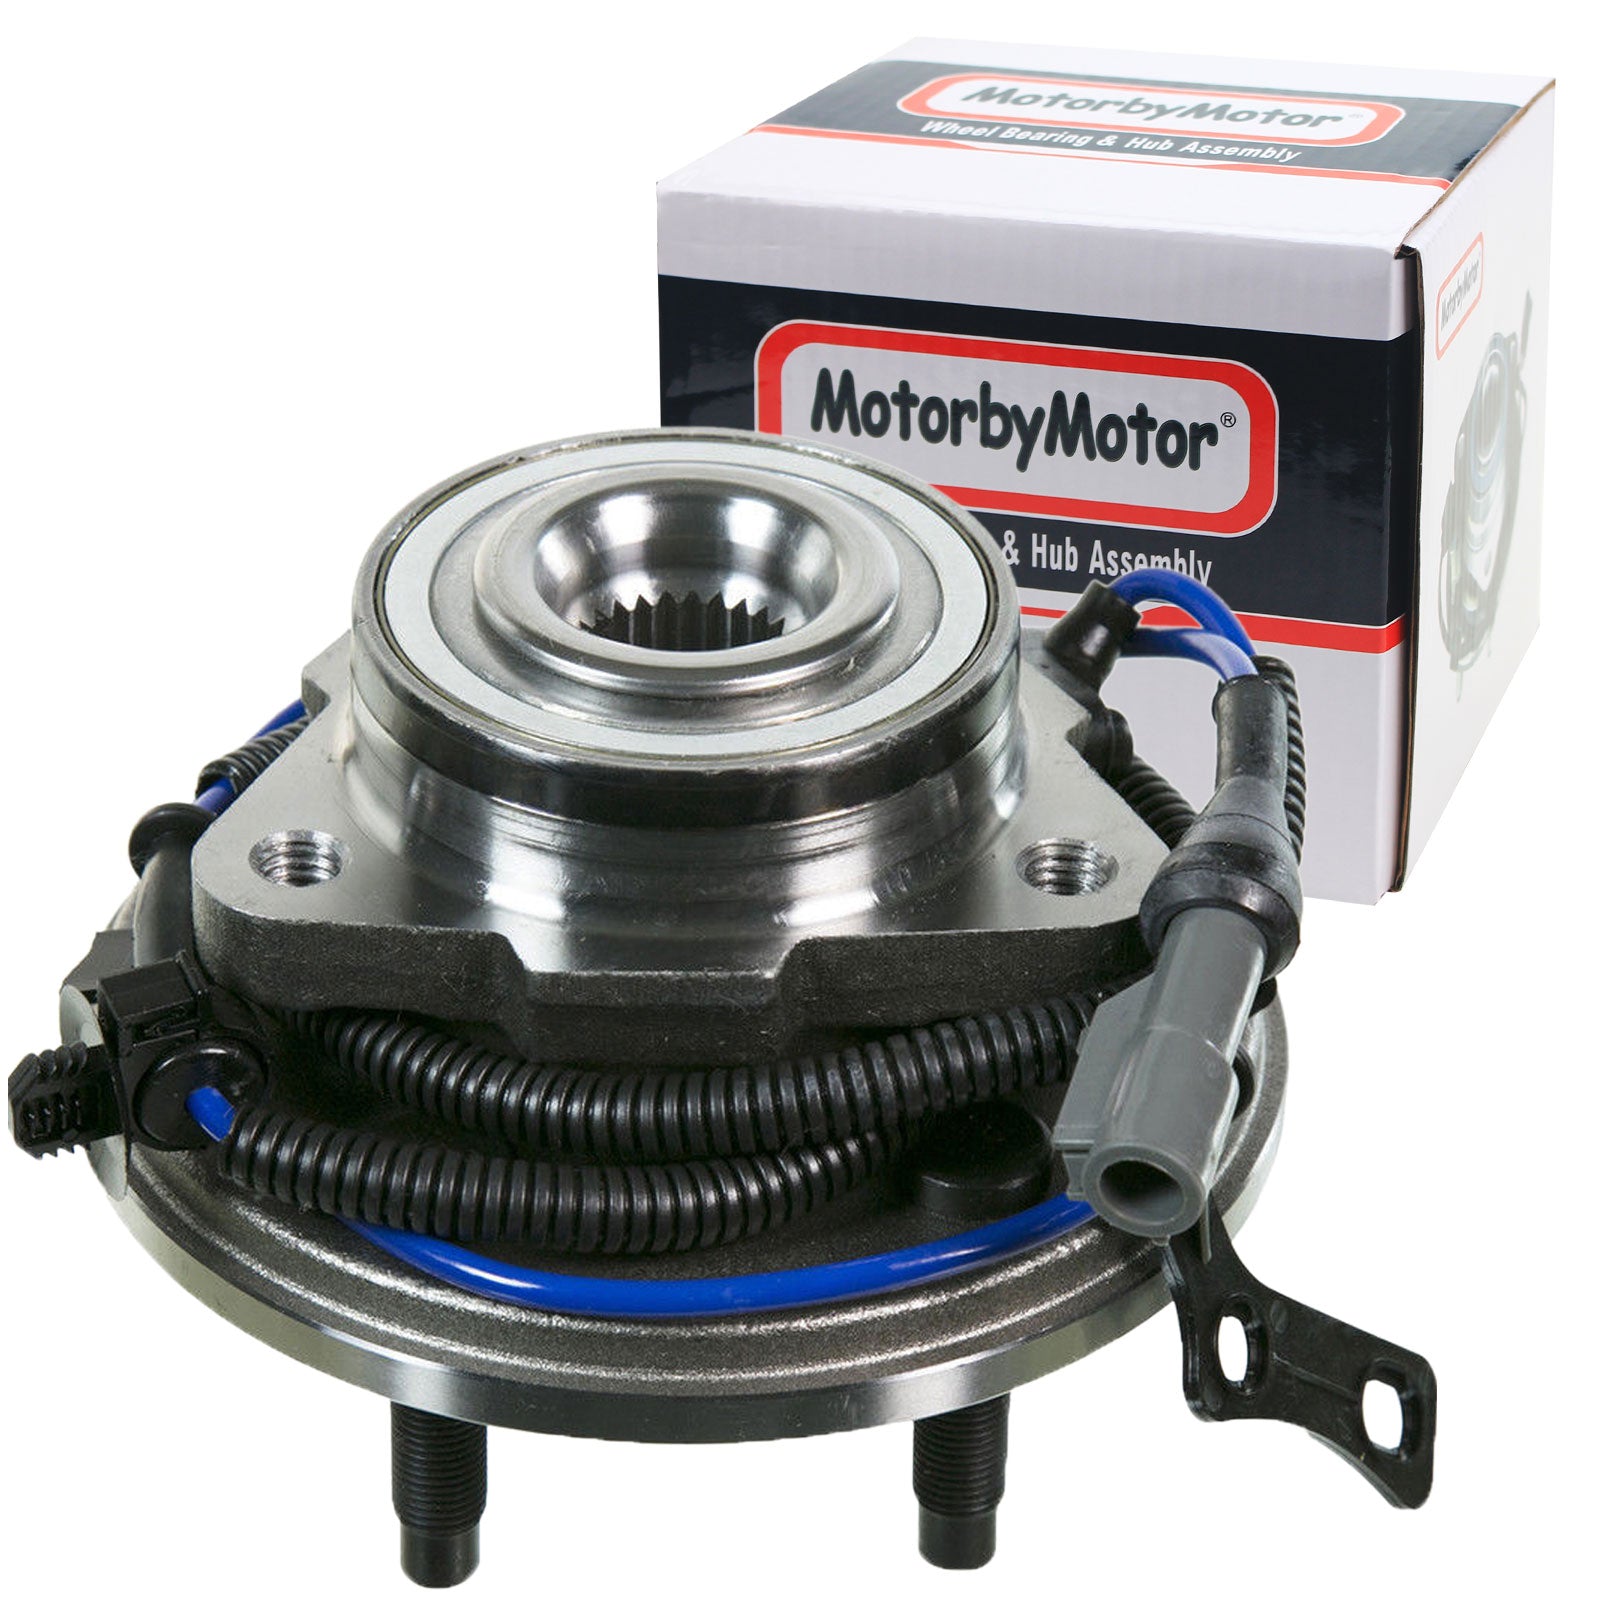 MotorbyMotor 515078 Front Wheel Bearing Hub Assbmely 5 Lugs w/ABS for